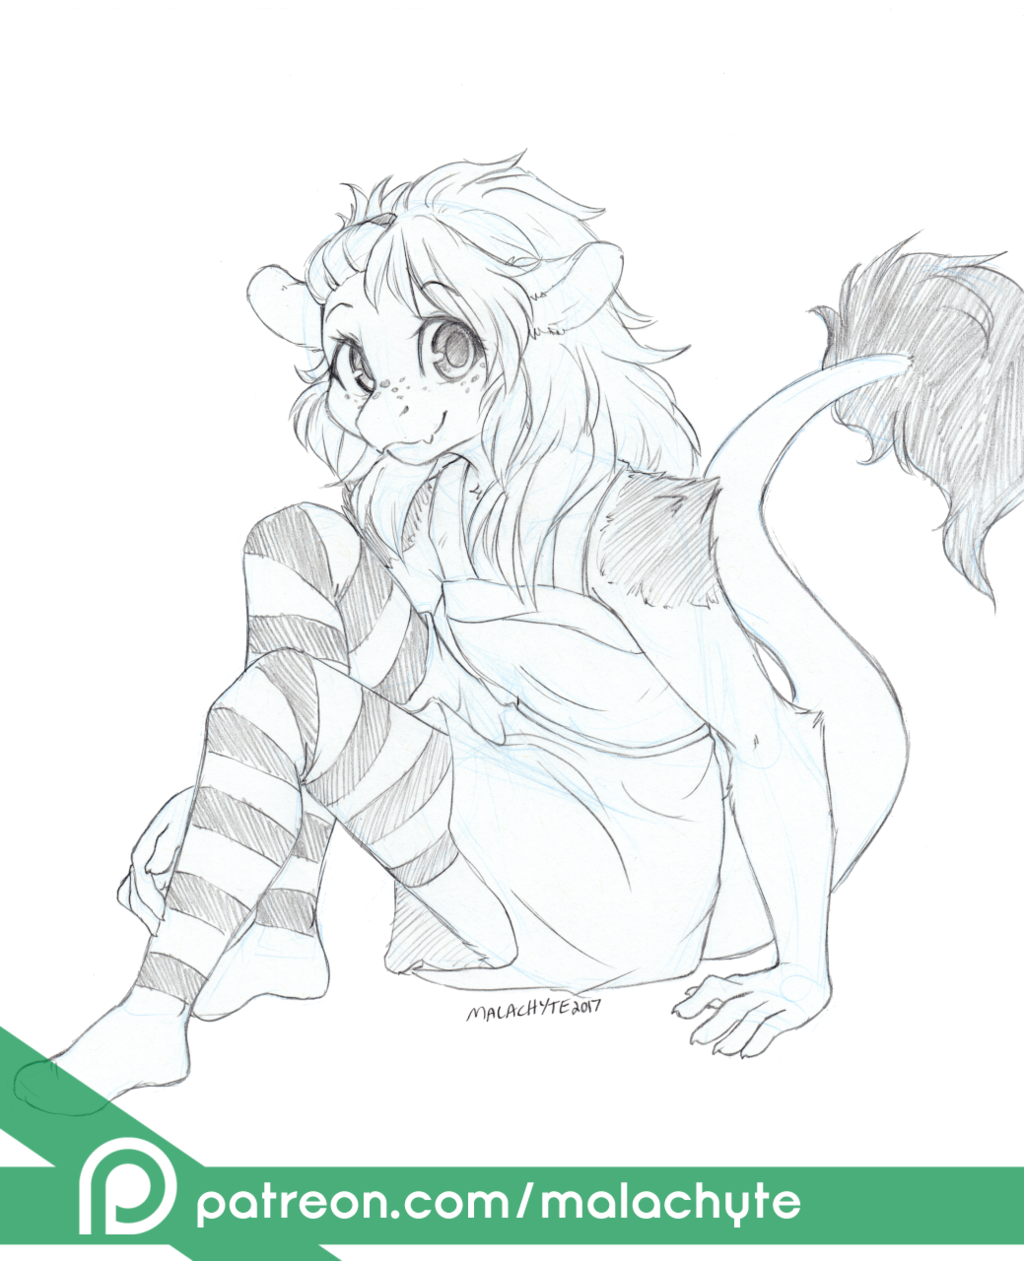 [Patreon] Maou March Sketch